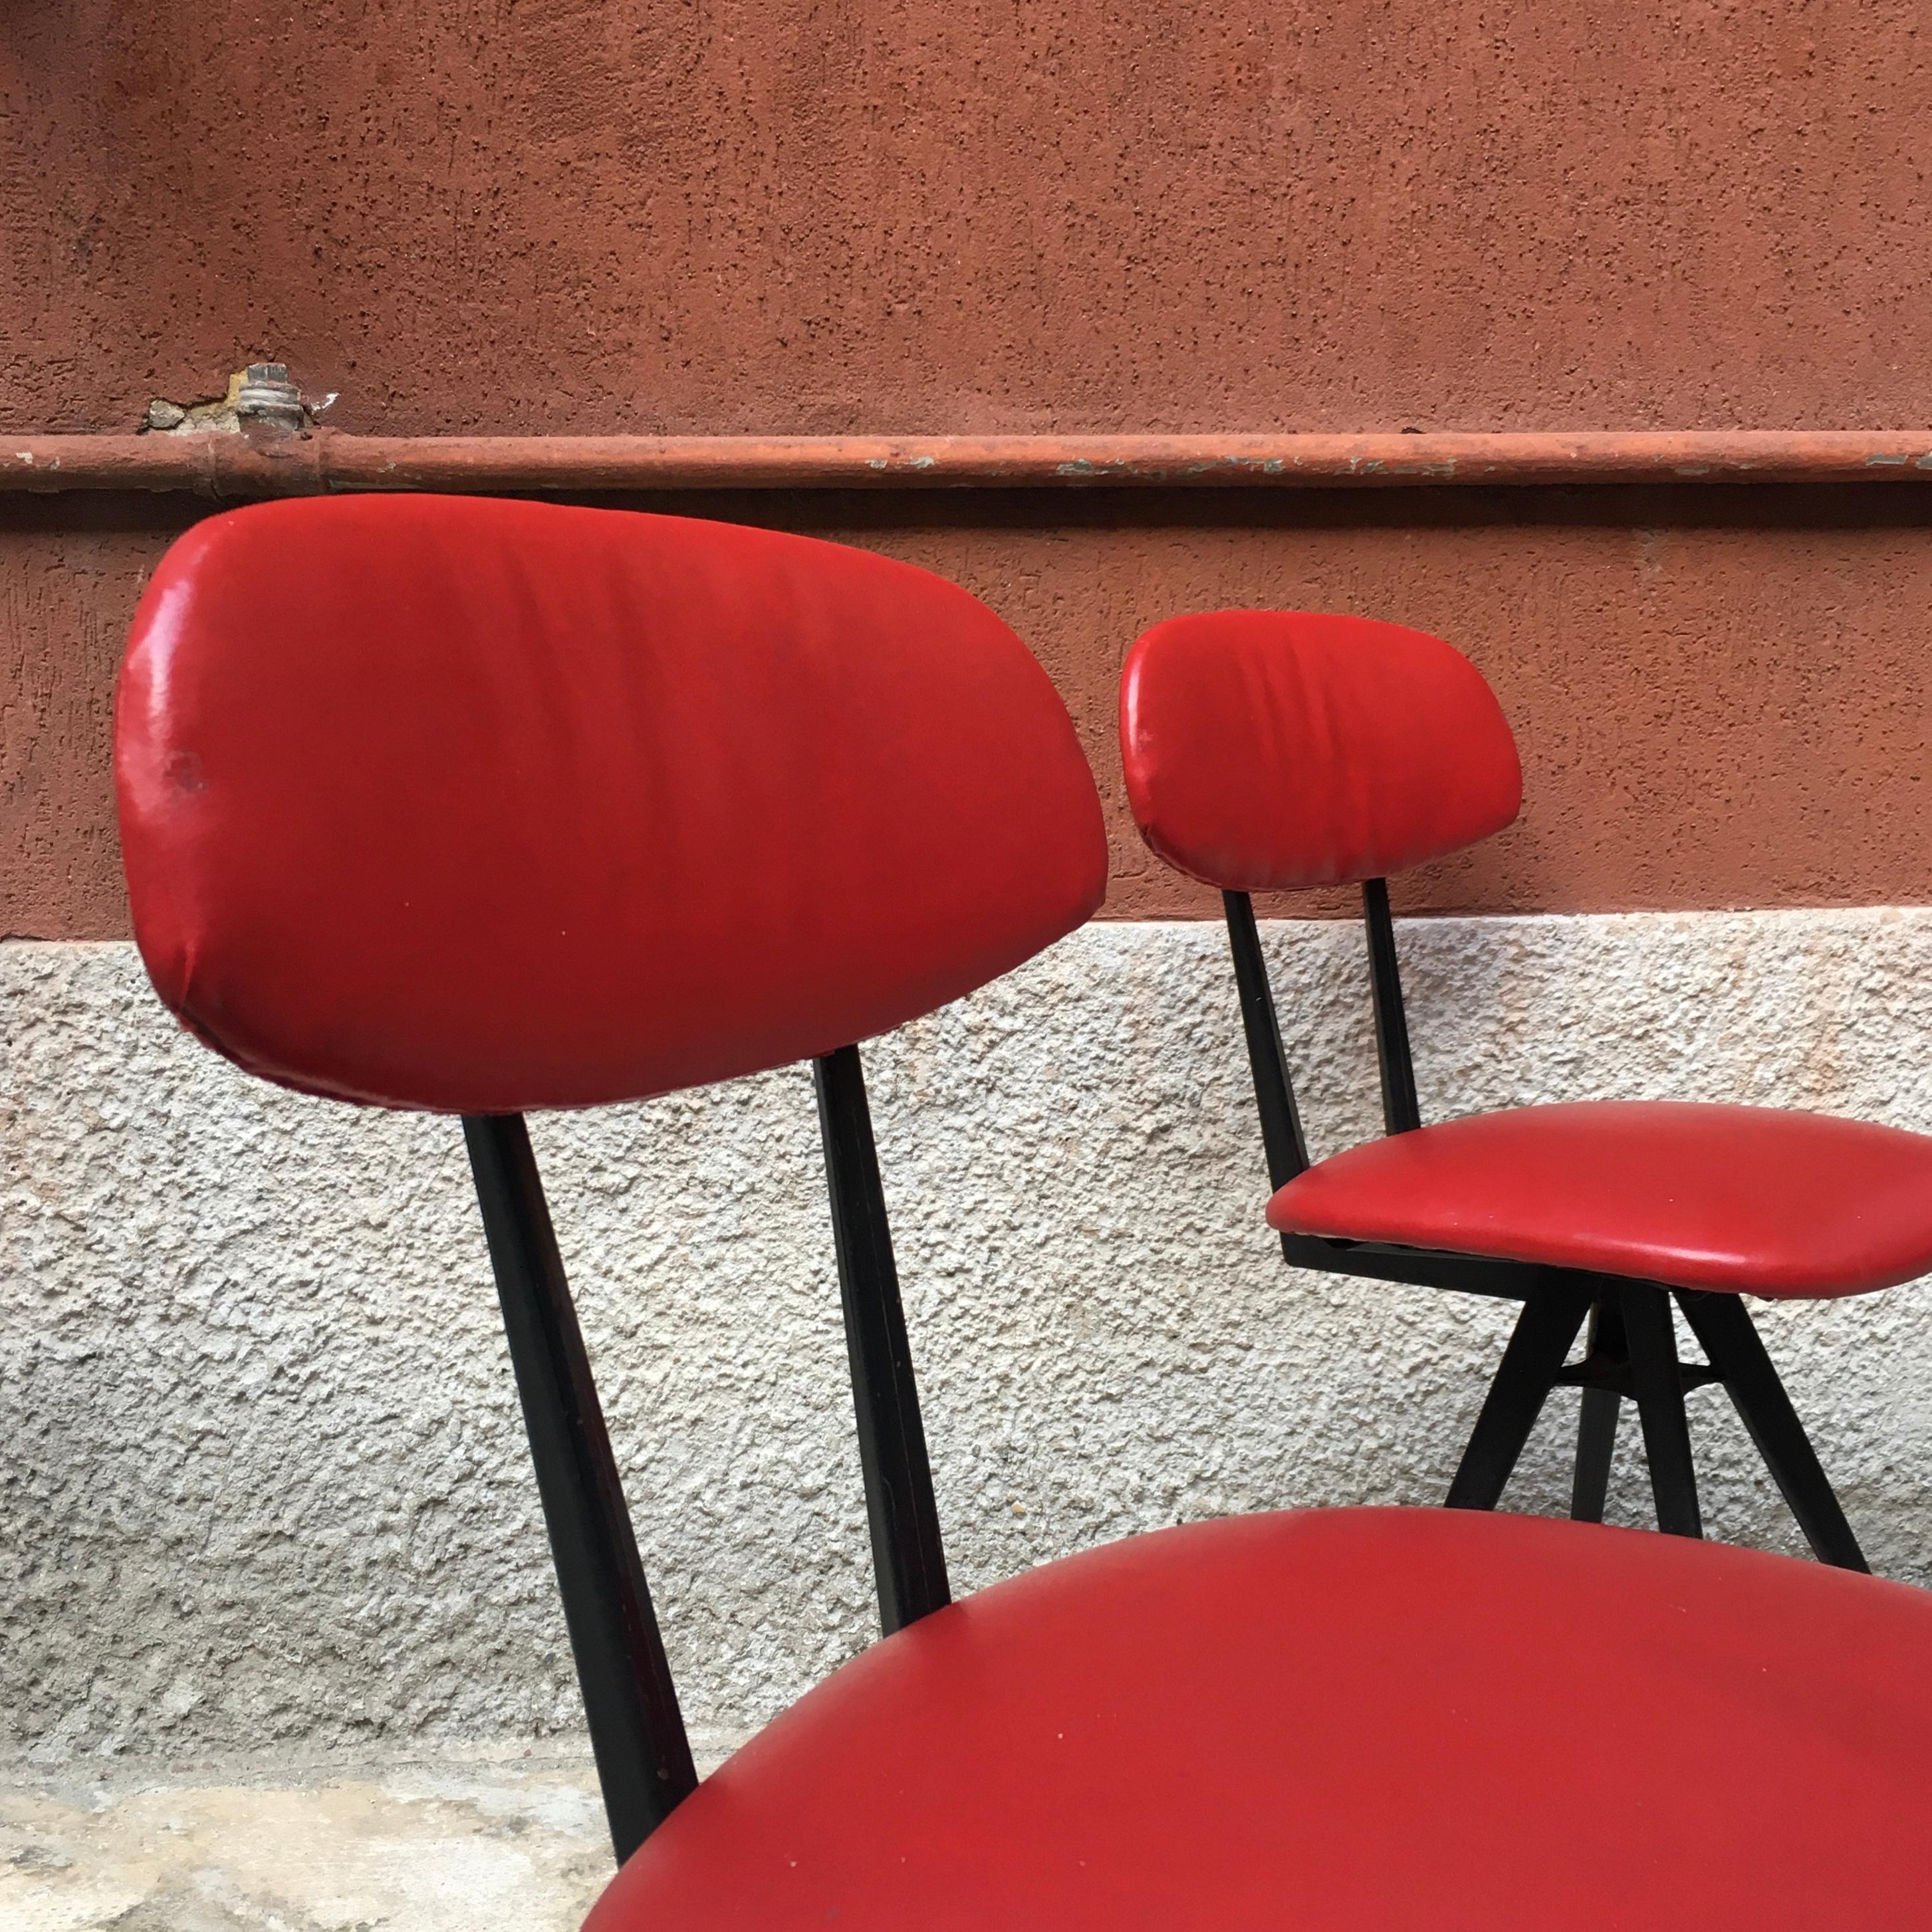 Italian Red Leatherette and Metal Legs Chairs, 1960s (Mitte des 20. Jahrhunderts)